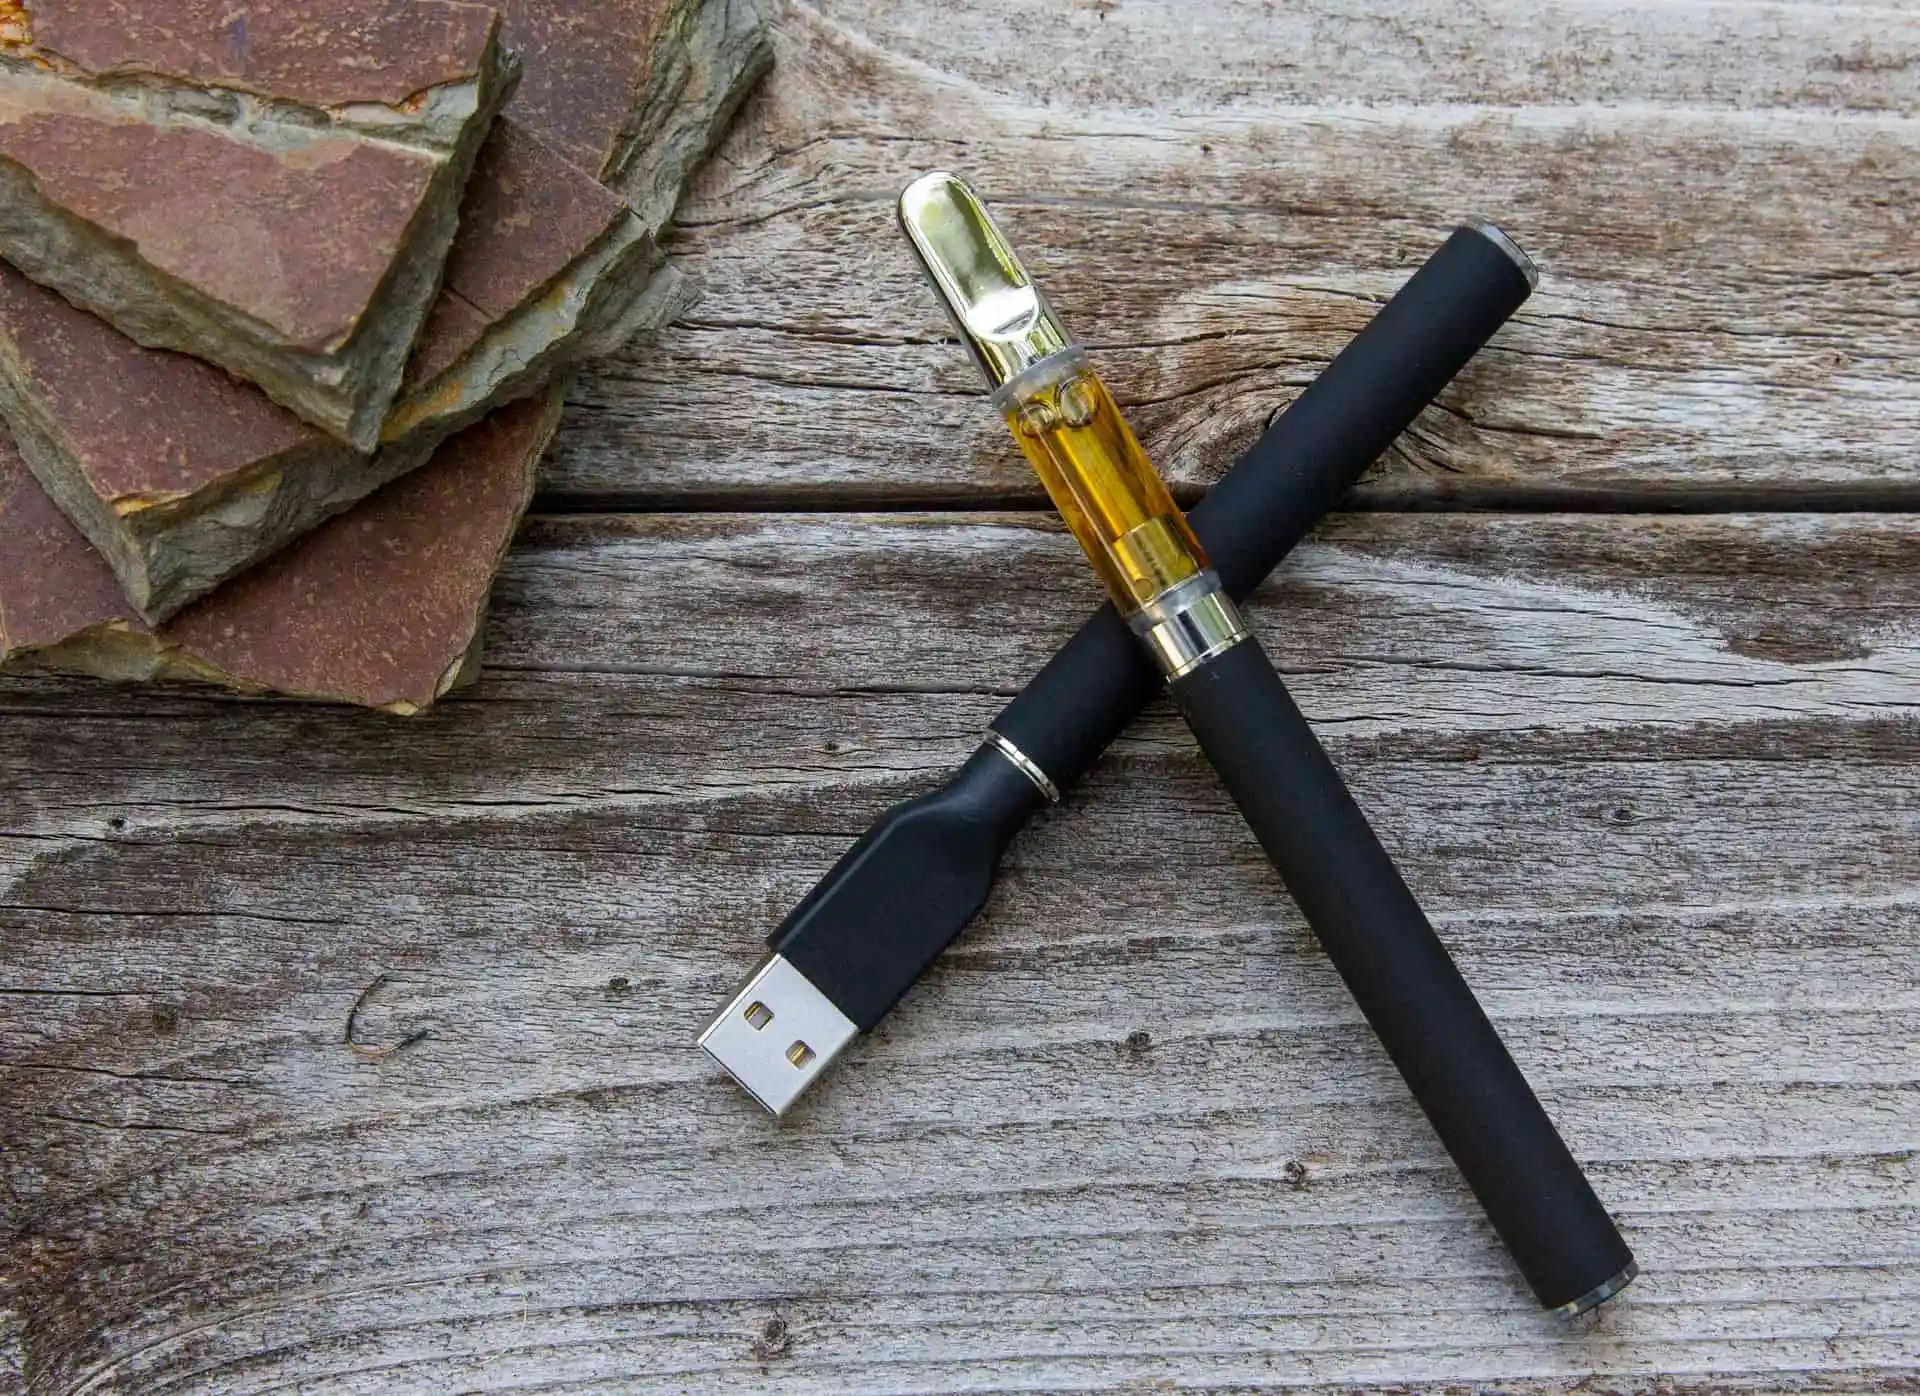 Buying hhc vape cartridges online – Safety tips and considerations